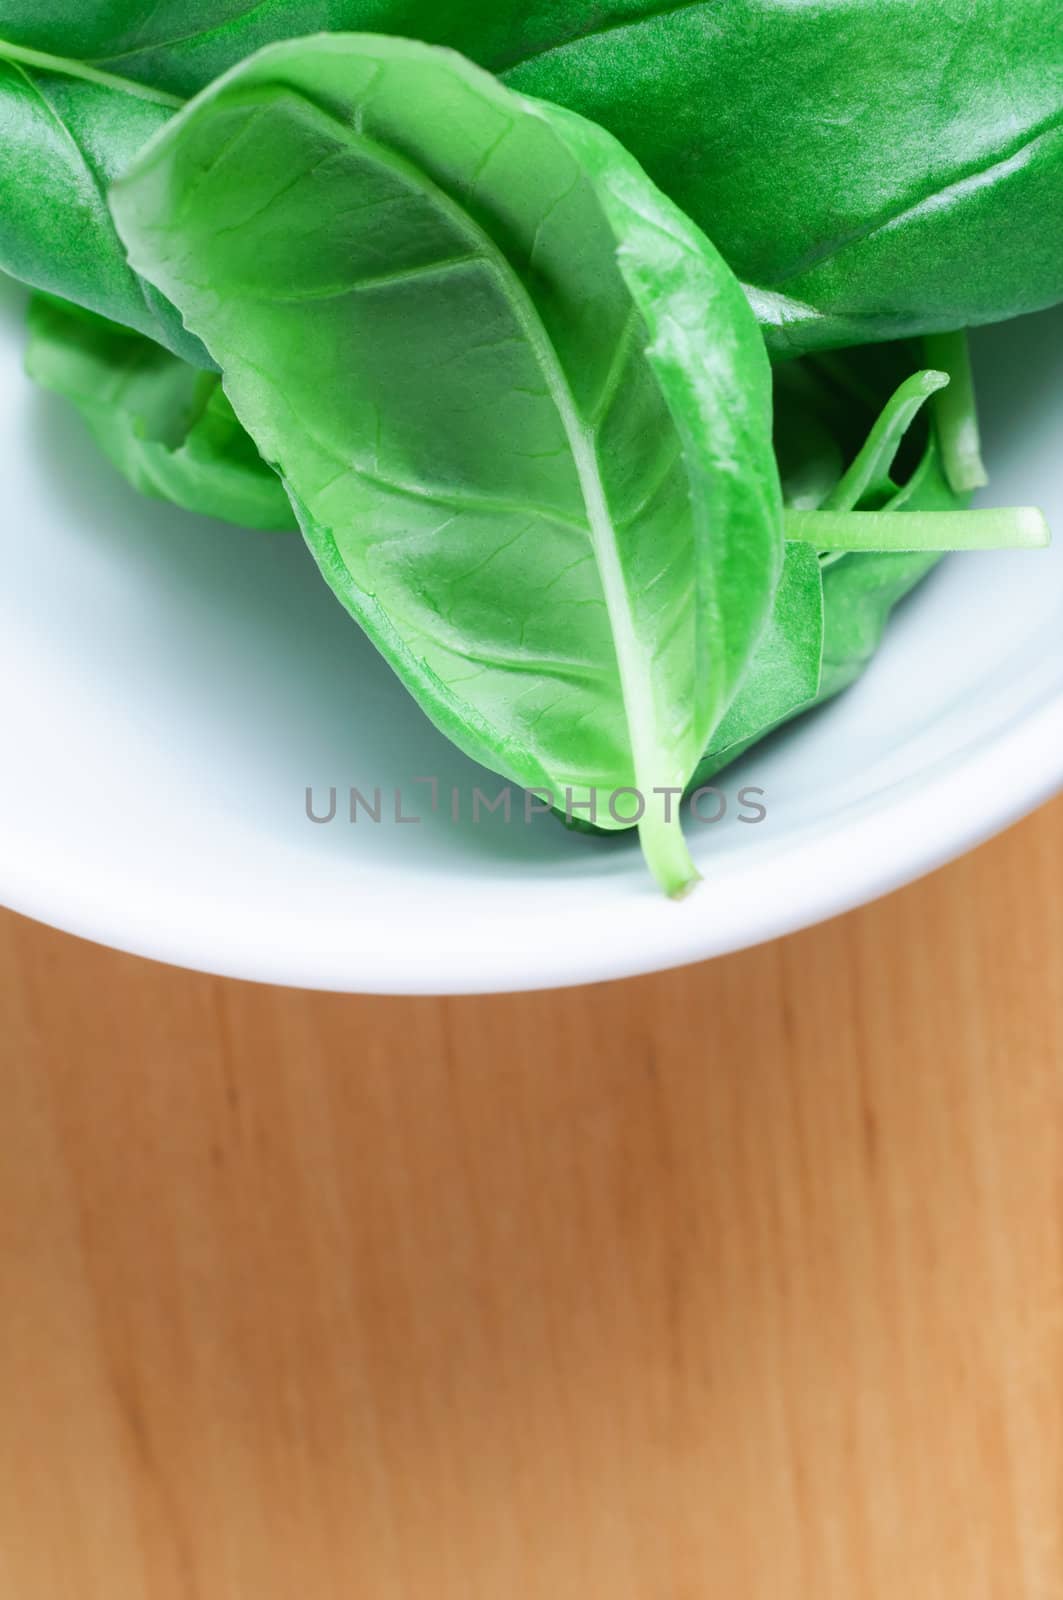 Close up (macro) of whole green basil leaves in a white china bowl, on a light wooden surface. Vertical orientation with copy space below.